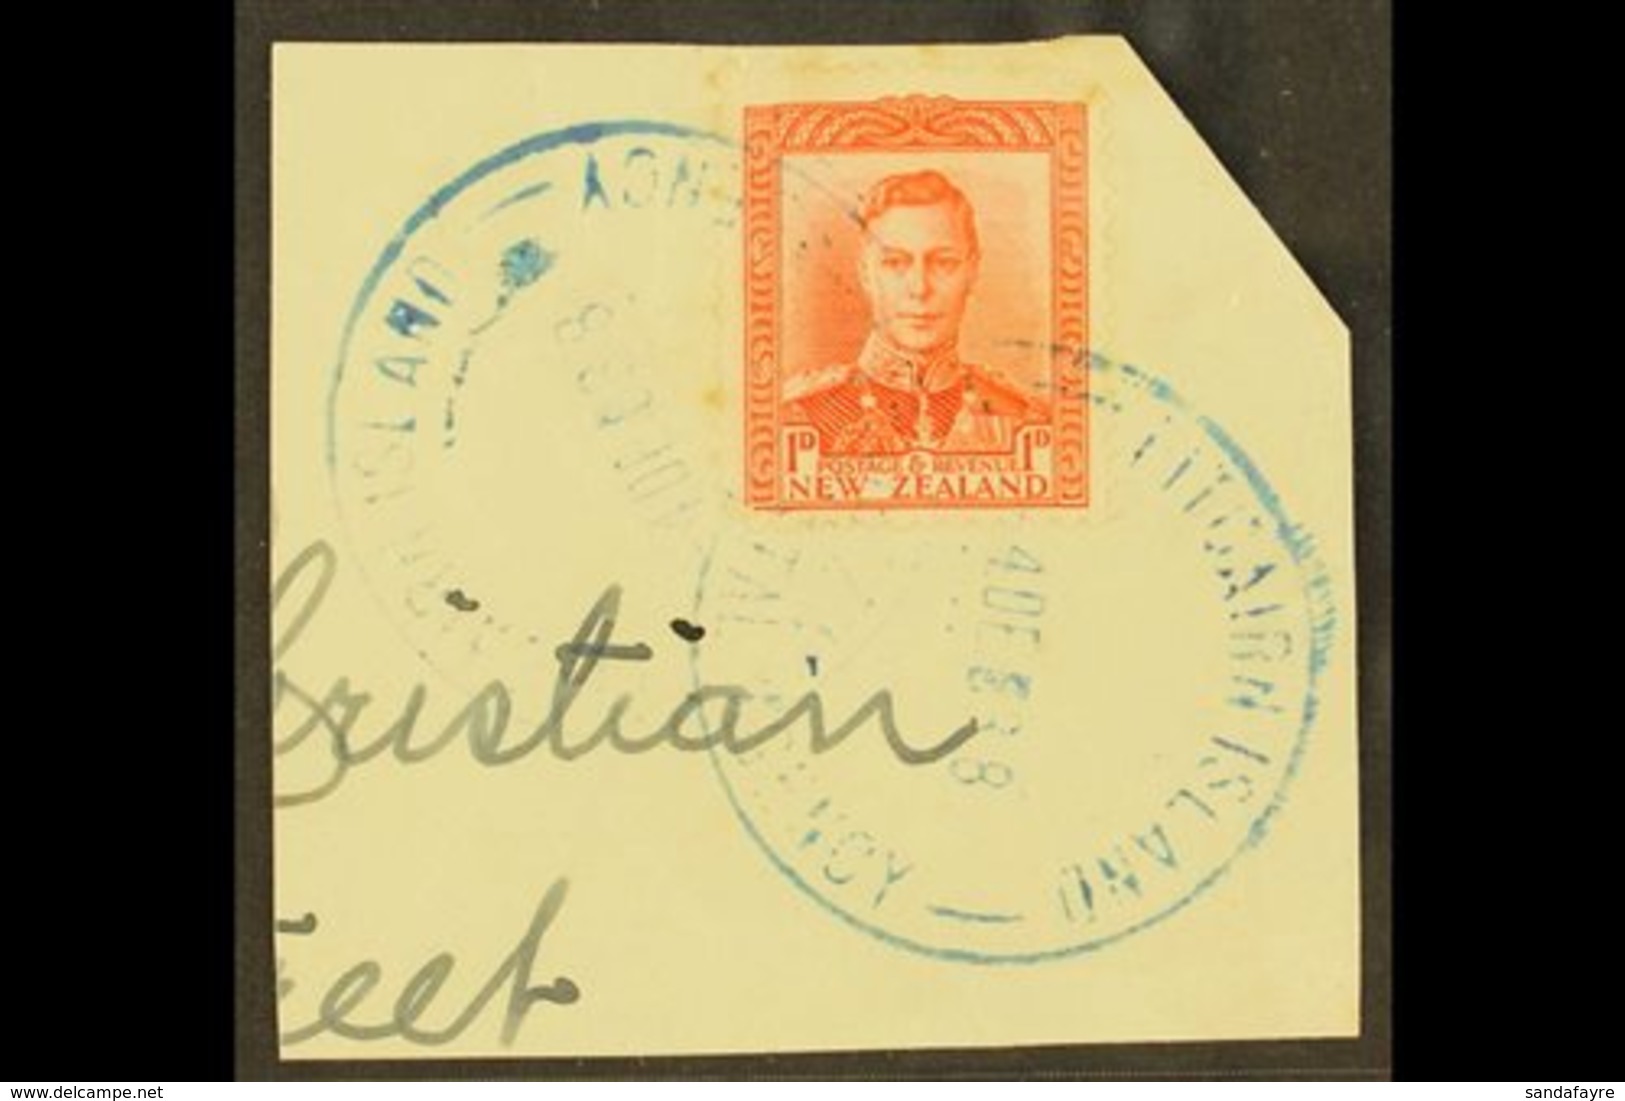 1938 1d Scarlet KGVI Of New Zealand, On Piece Tied By Fine Full "PITCAIRN ISLAND" Cds Cancels Of 4 DE 38, SG Z59. For Mo - Pitcairn Islands